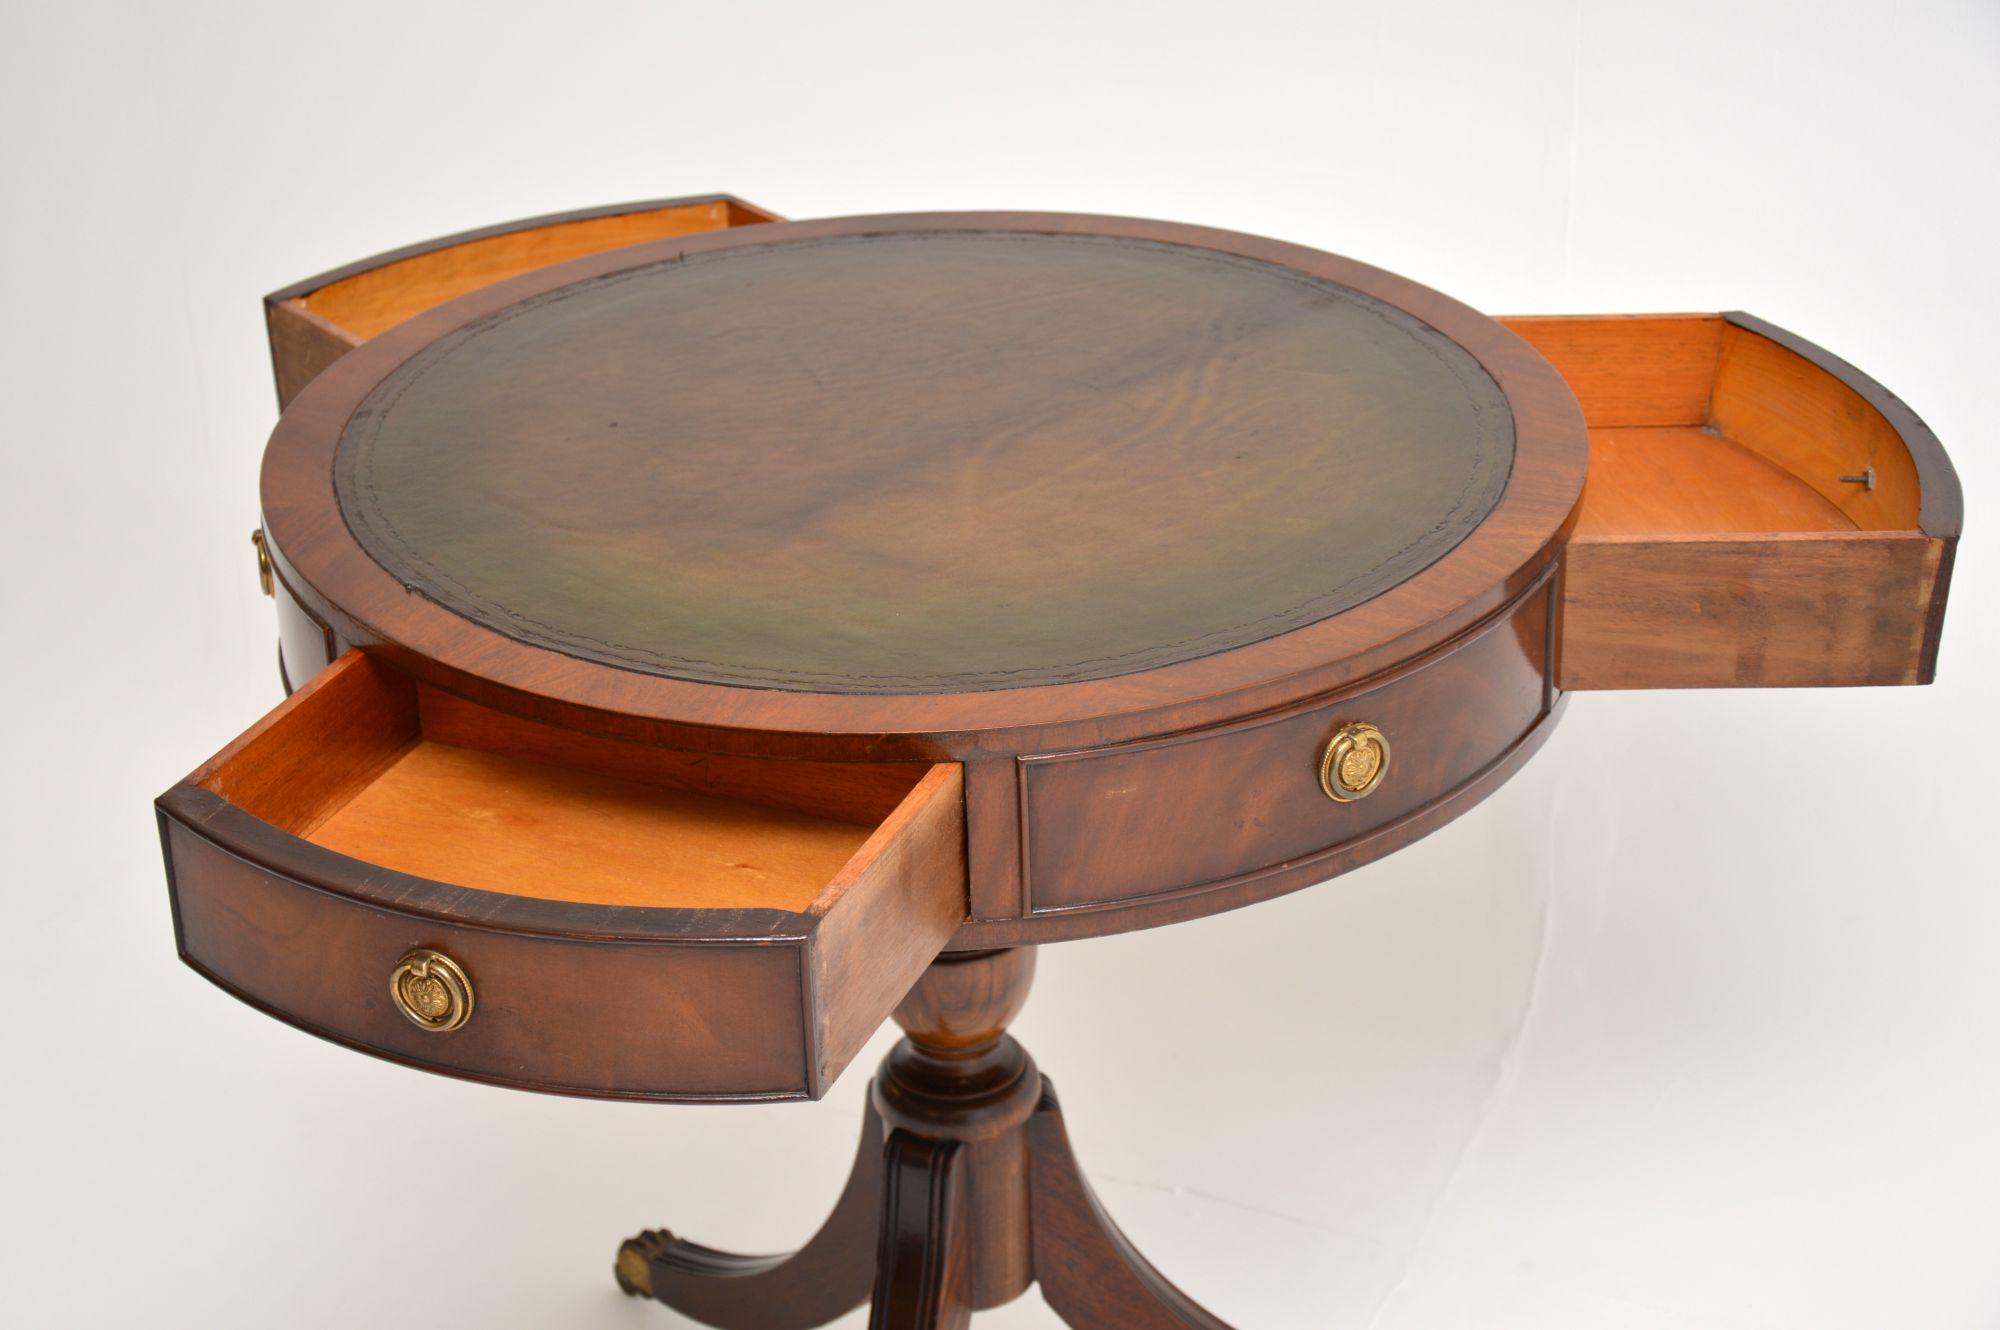 Antique Regency Style Mahogany and Leather Drum Table 1